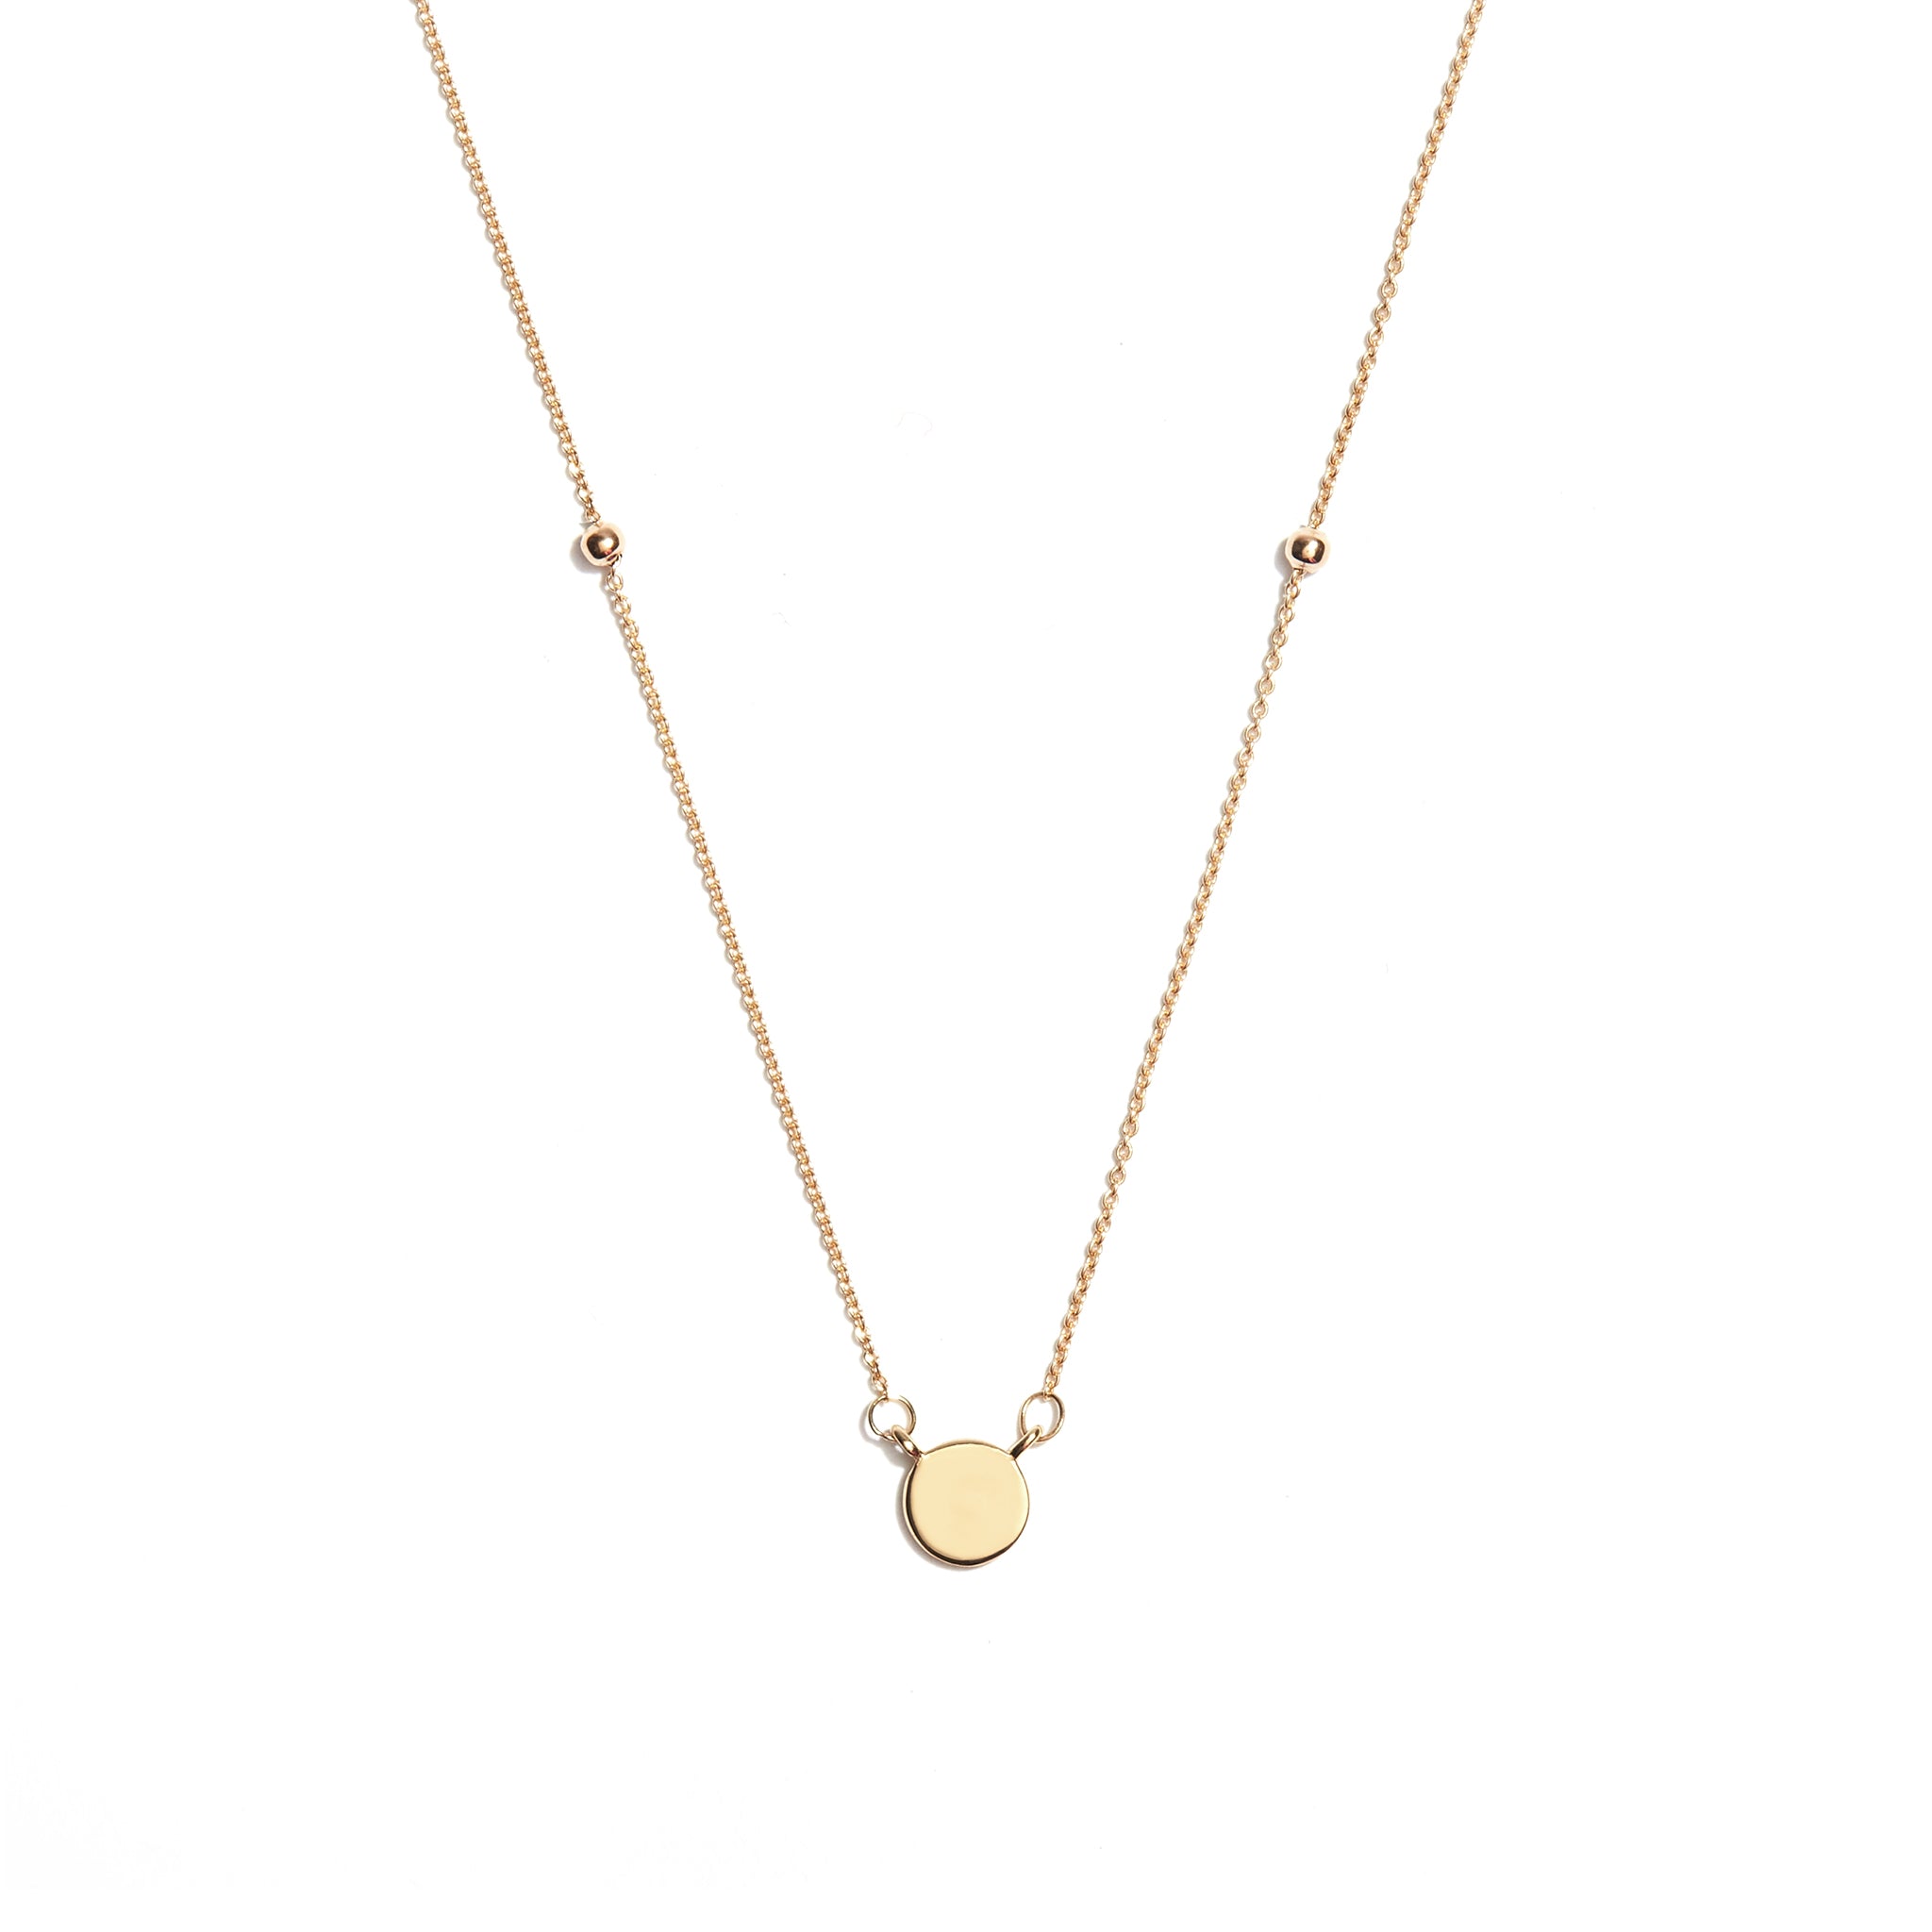 Add a touch of elegance to your ensemble with the 9 carat yellow gold disc & ball pendant. This stylish accessory features a sleek disc adorned with a dangling ball, perfect for adding a hint of glamour to any outfit. elevate your look with this versatile piece.